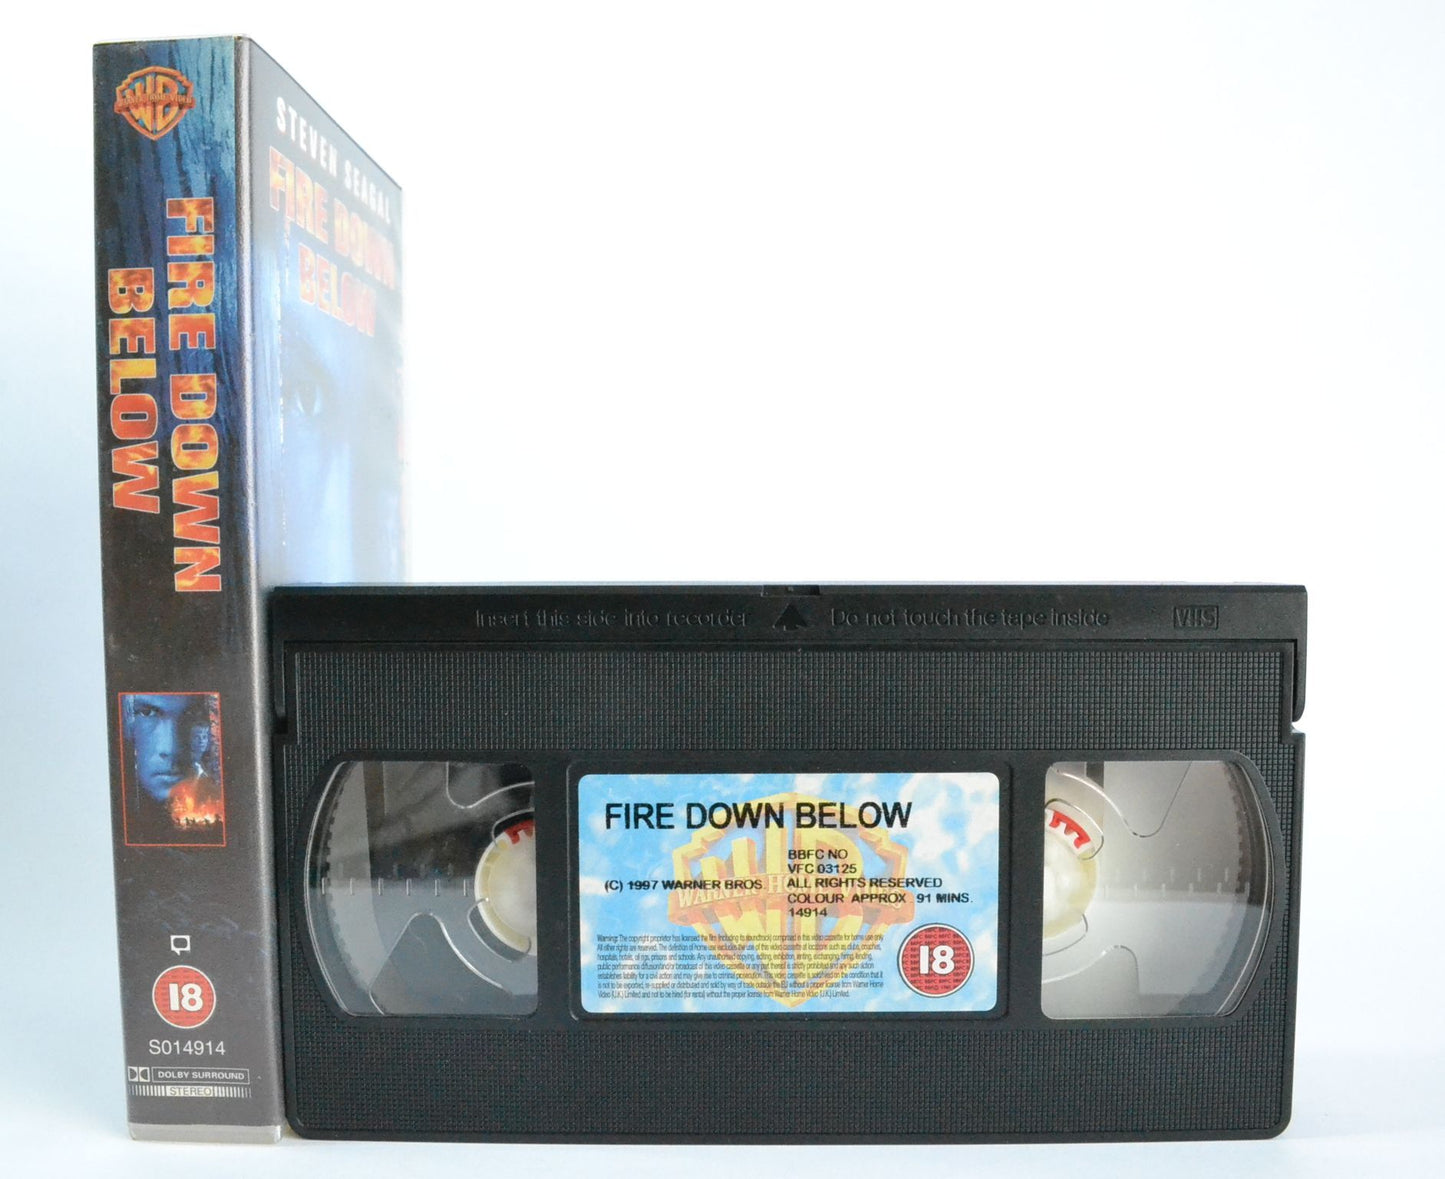 Fire Down Below: Steven Seagal - Toxic Waste - Eco-Thriller - Aikido Action - VHS-